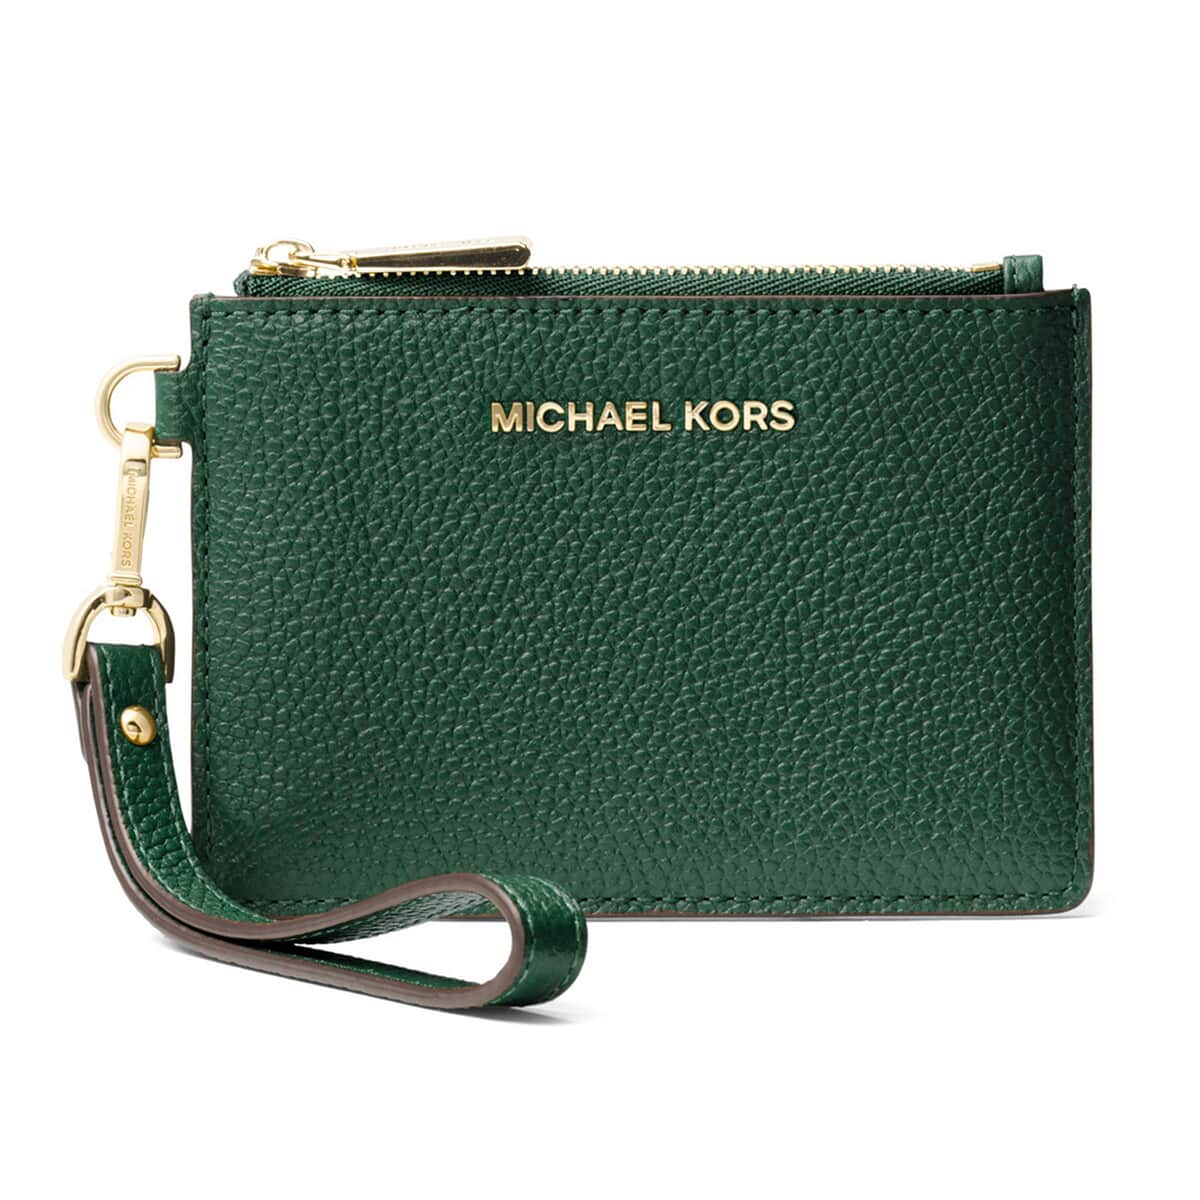 Michael Kors Green Pebbled Leather Jet Set Small Coin Purse (Ships in 8-10 Business Days)  image number 0